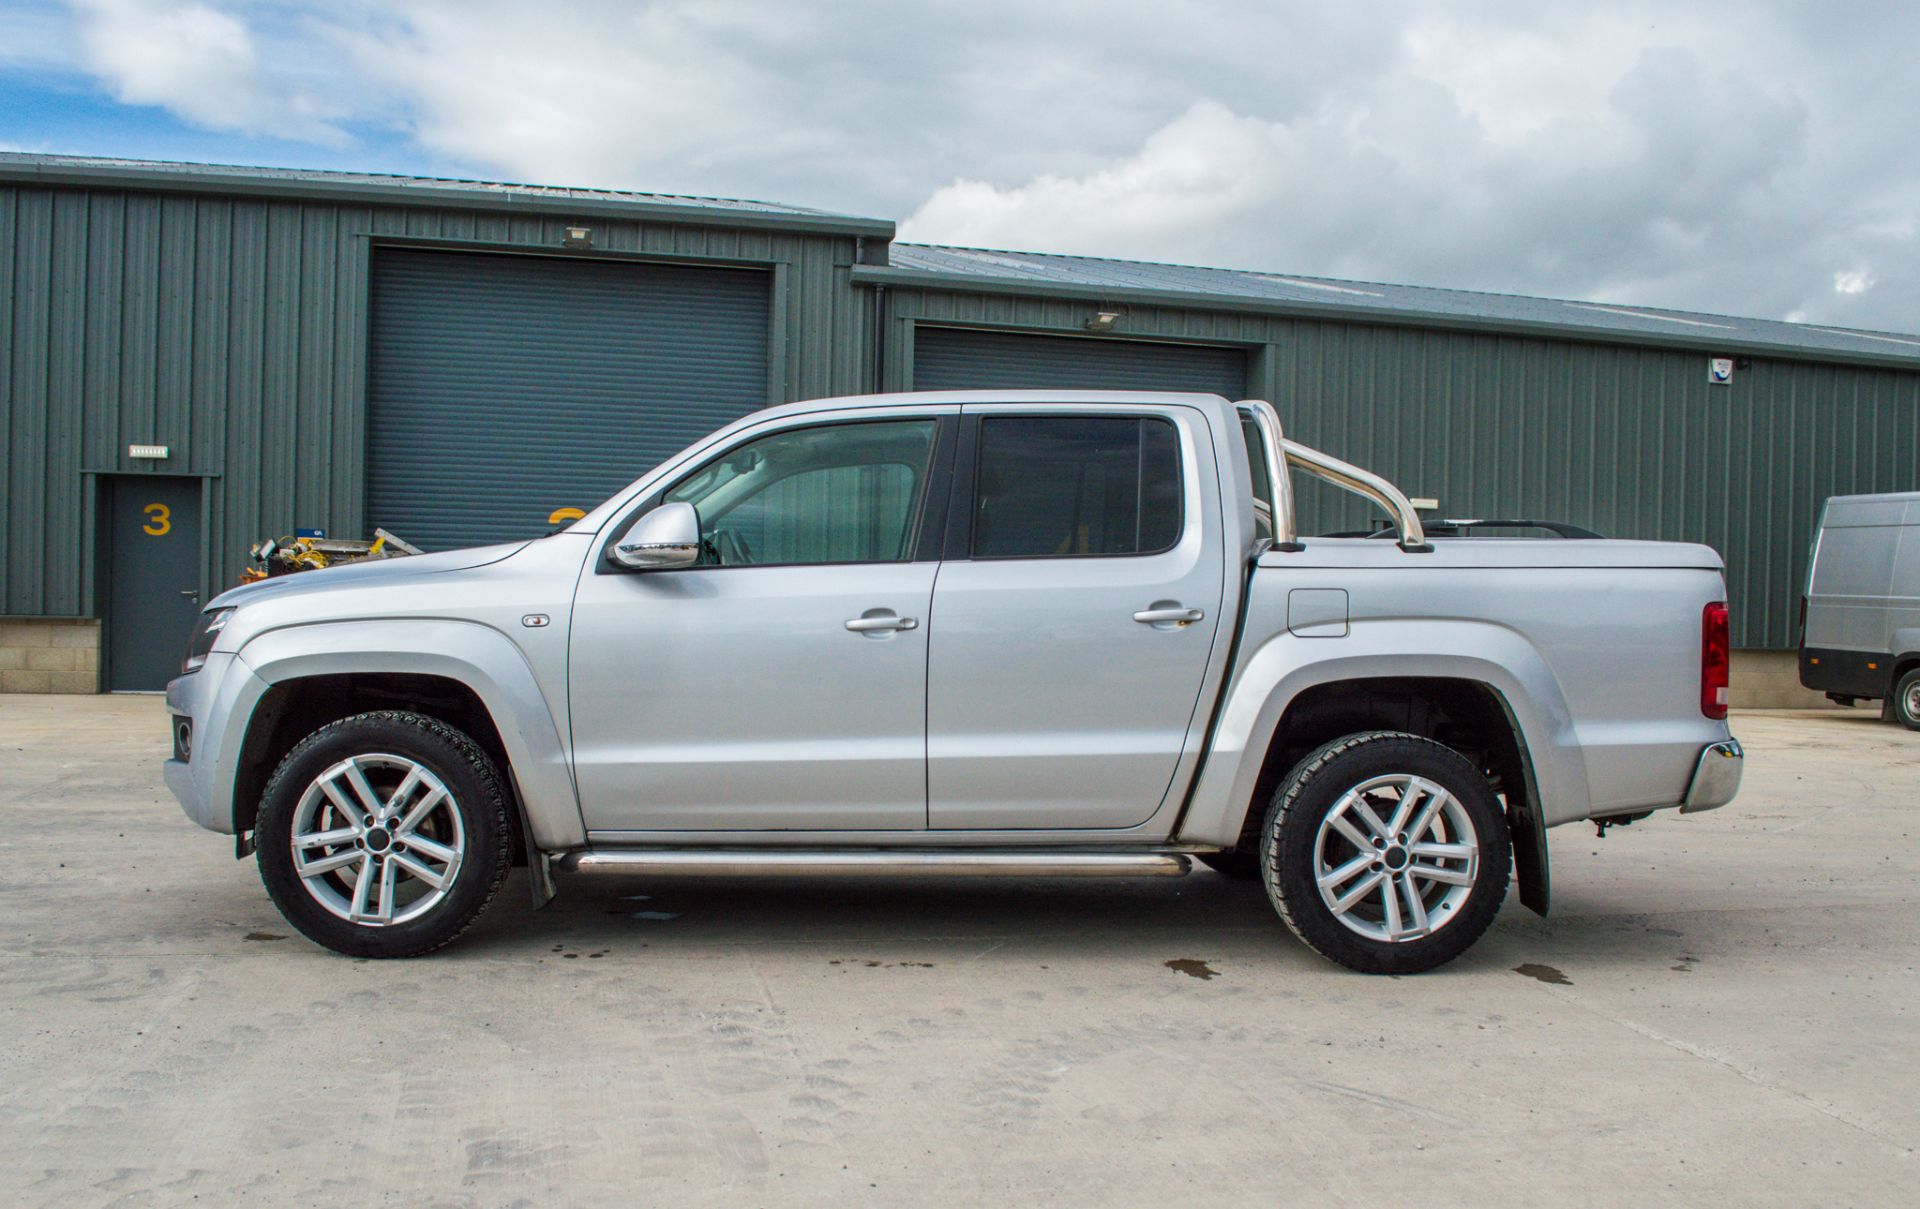 Volkswagen Amarok 2.0 TDI highline 4wd automatic double cab pick up Reg No: PE63 EYH Date of - Image 7 of 30